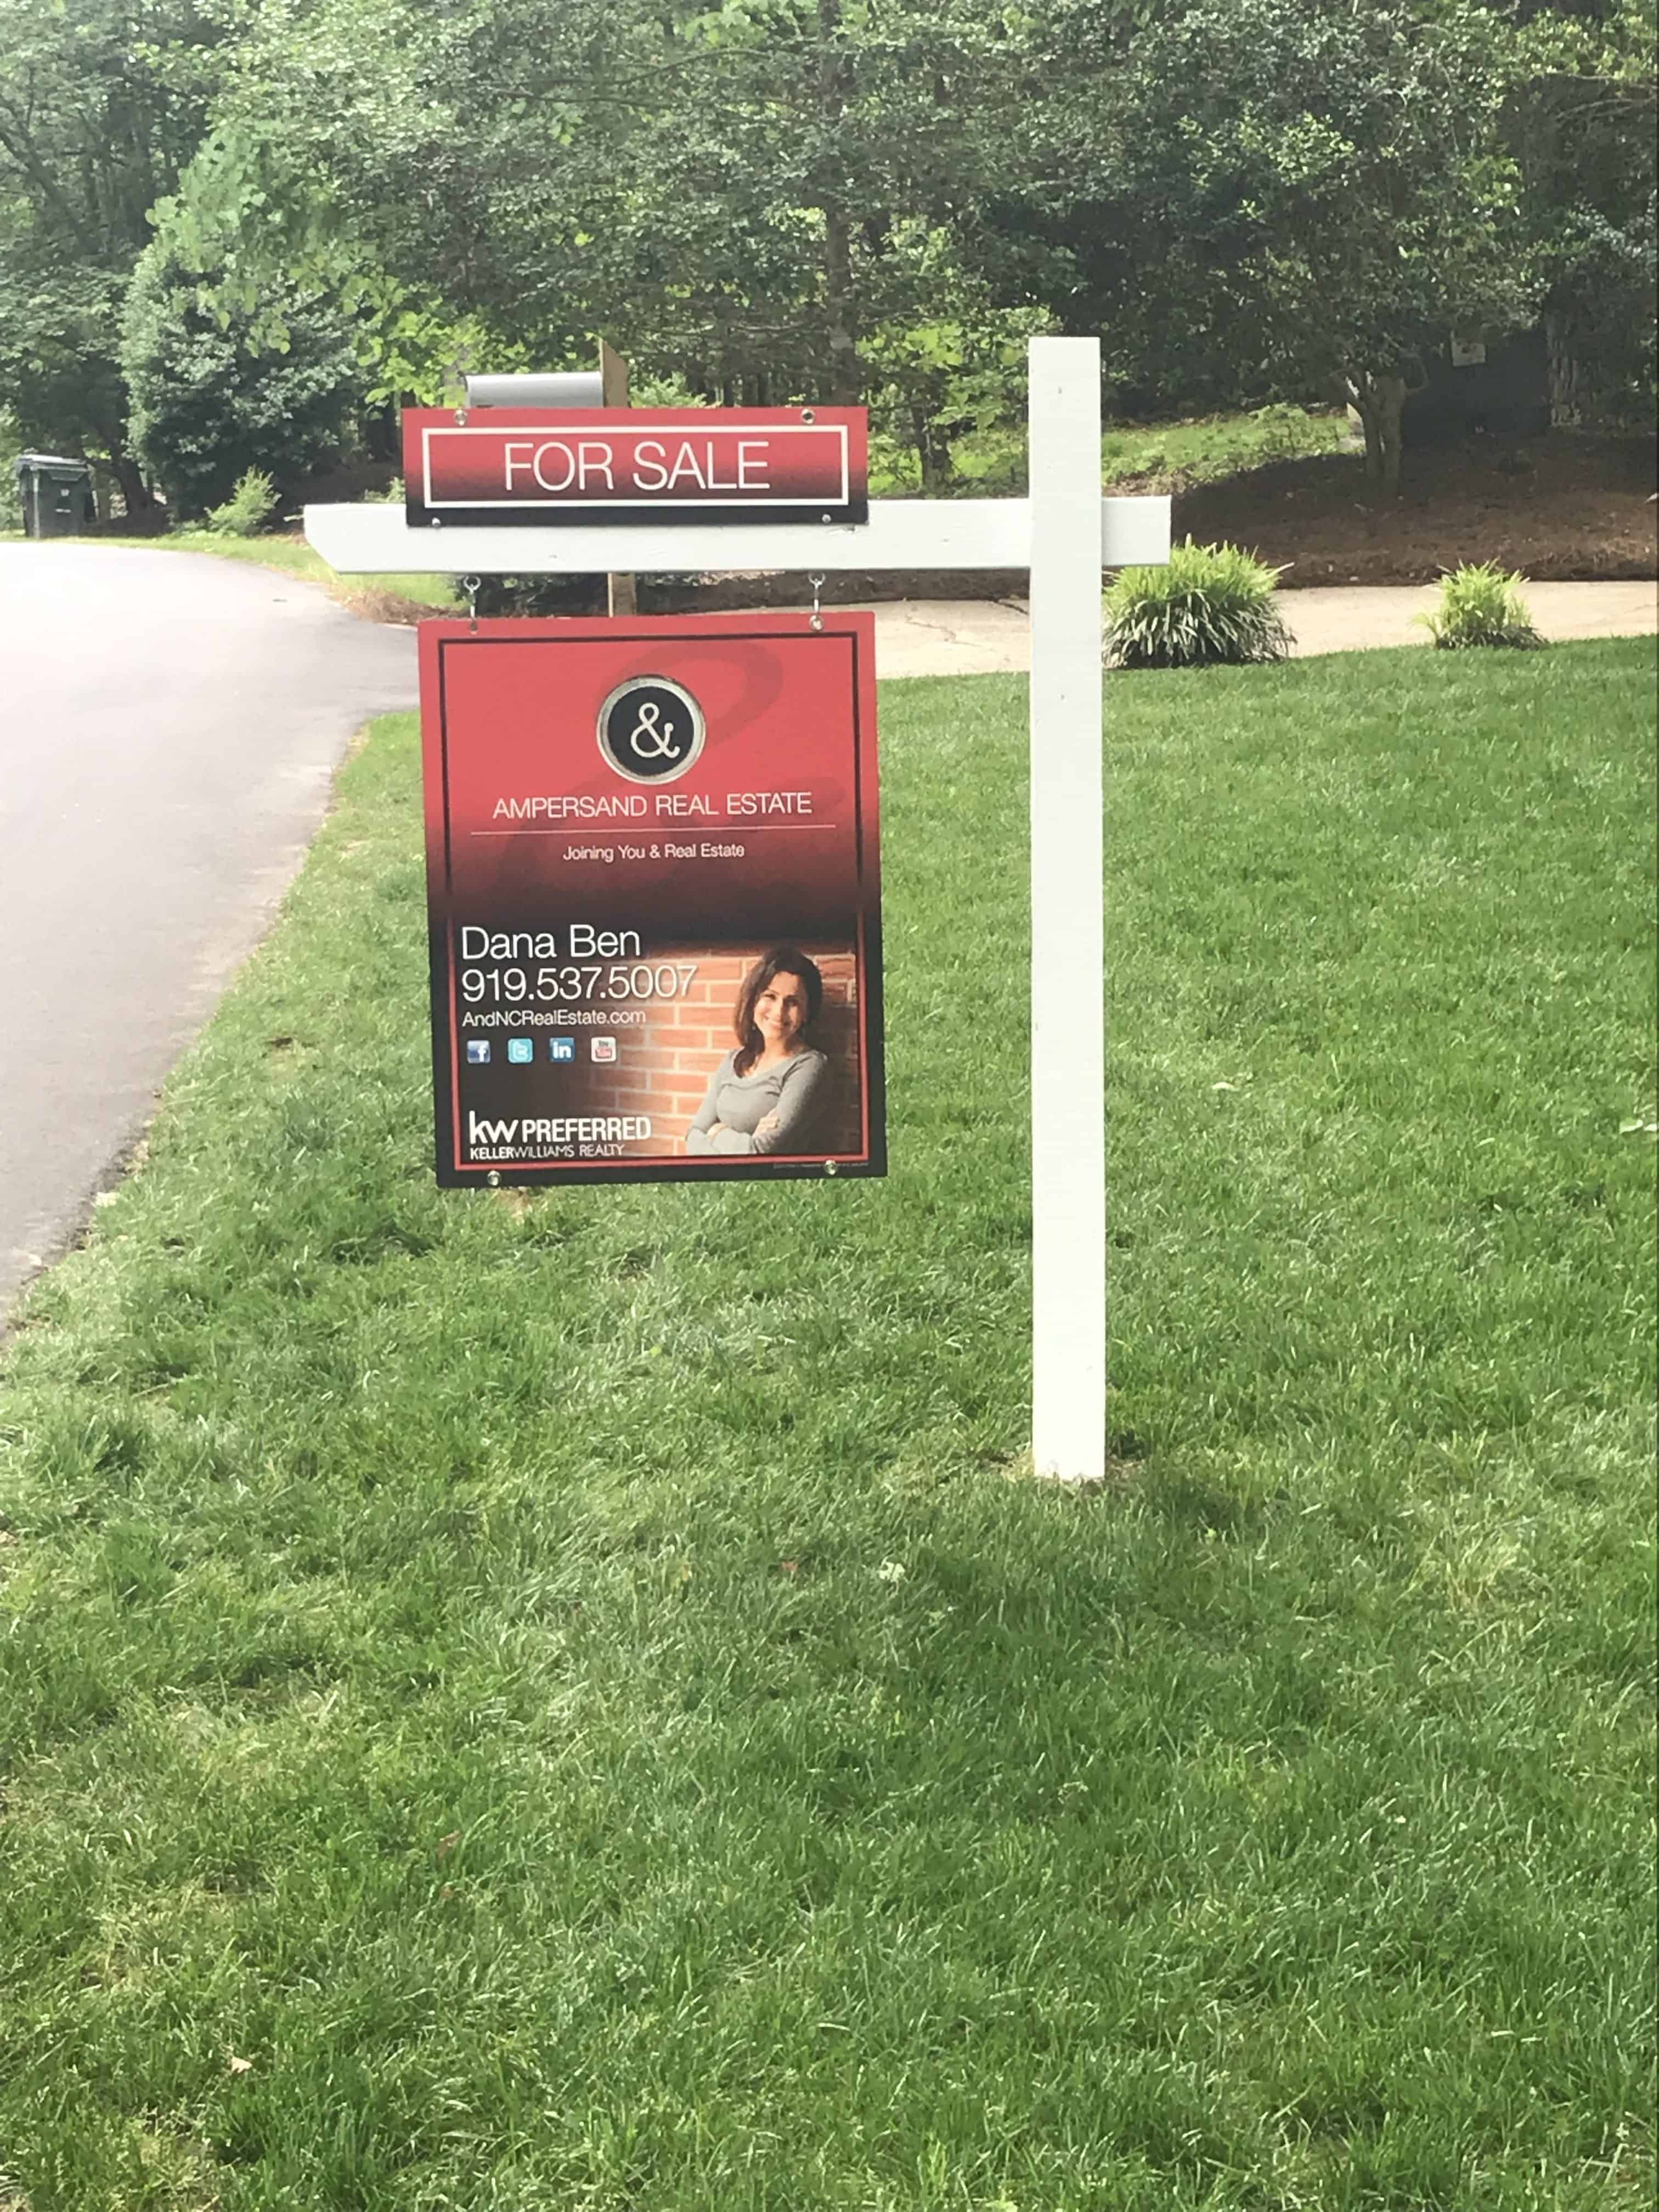 Residential Real estate sign installation